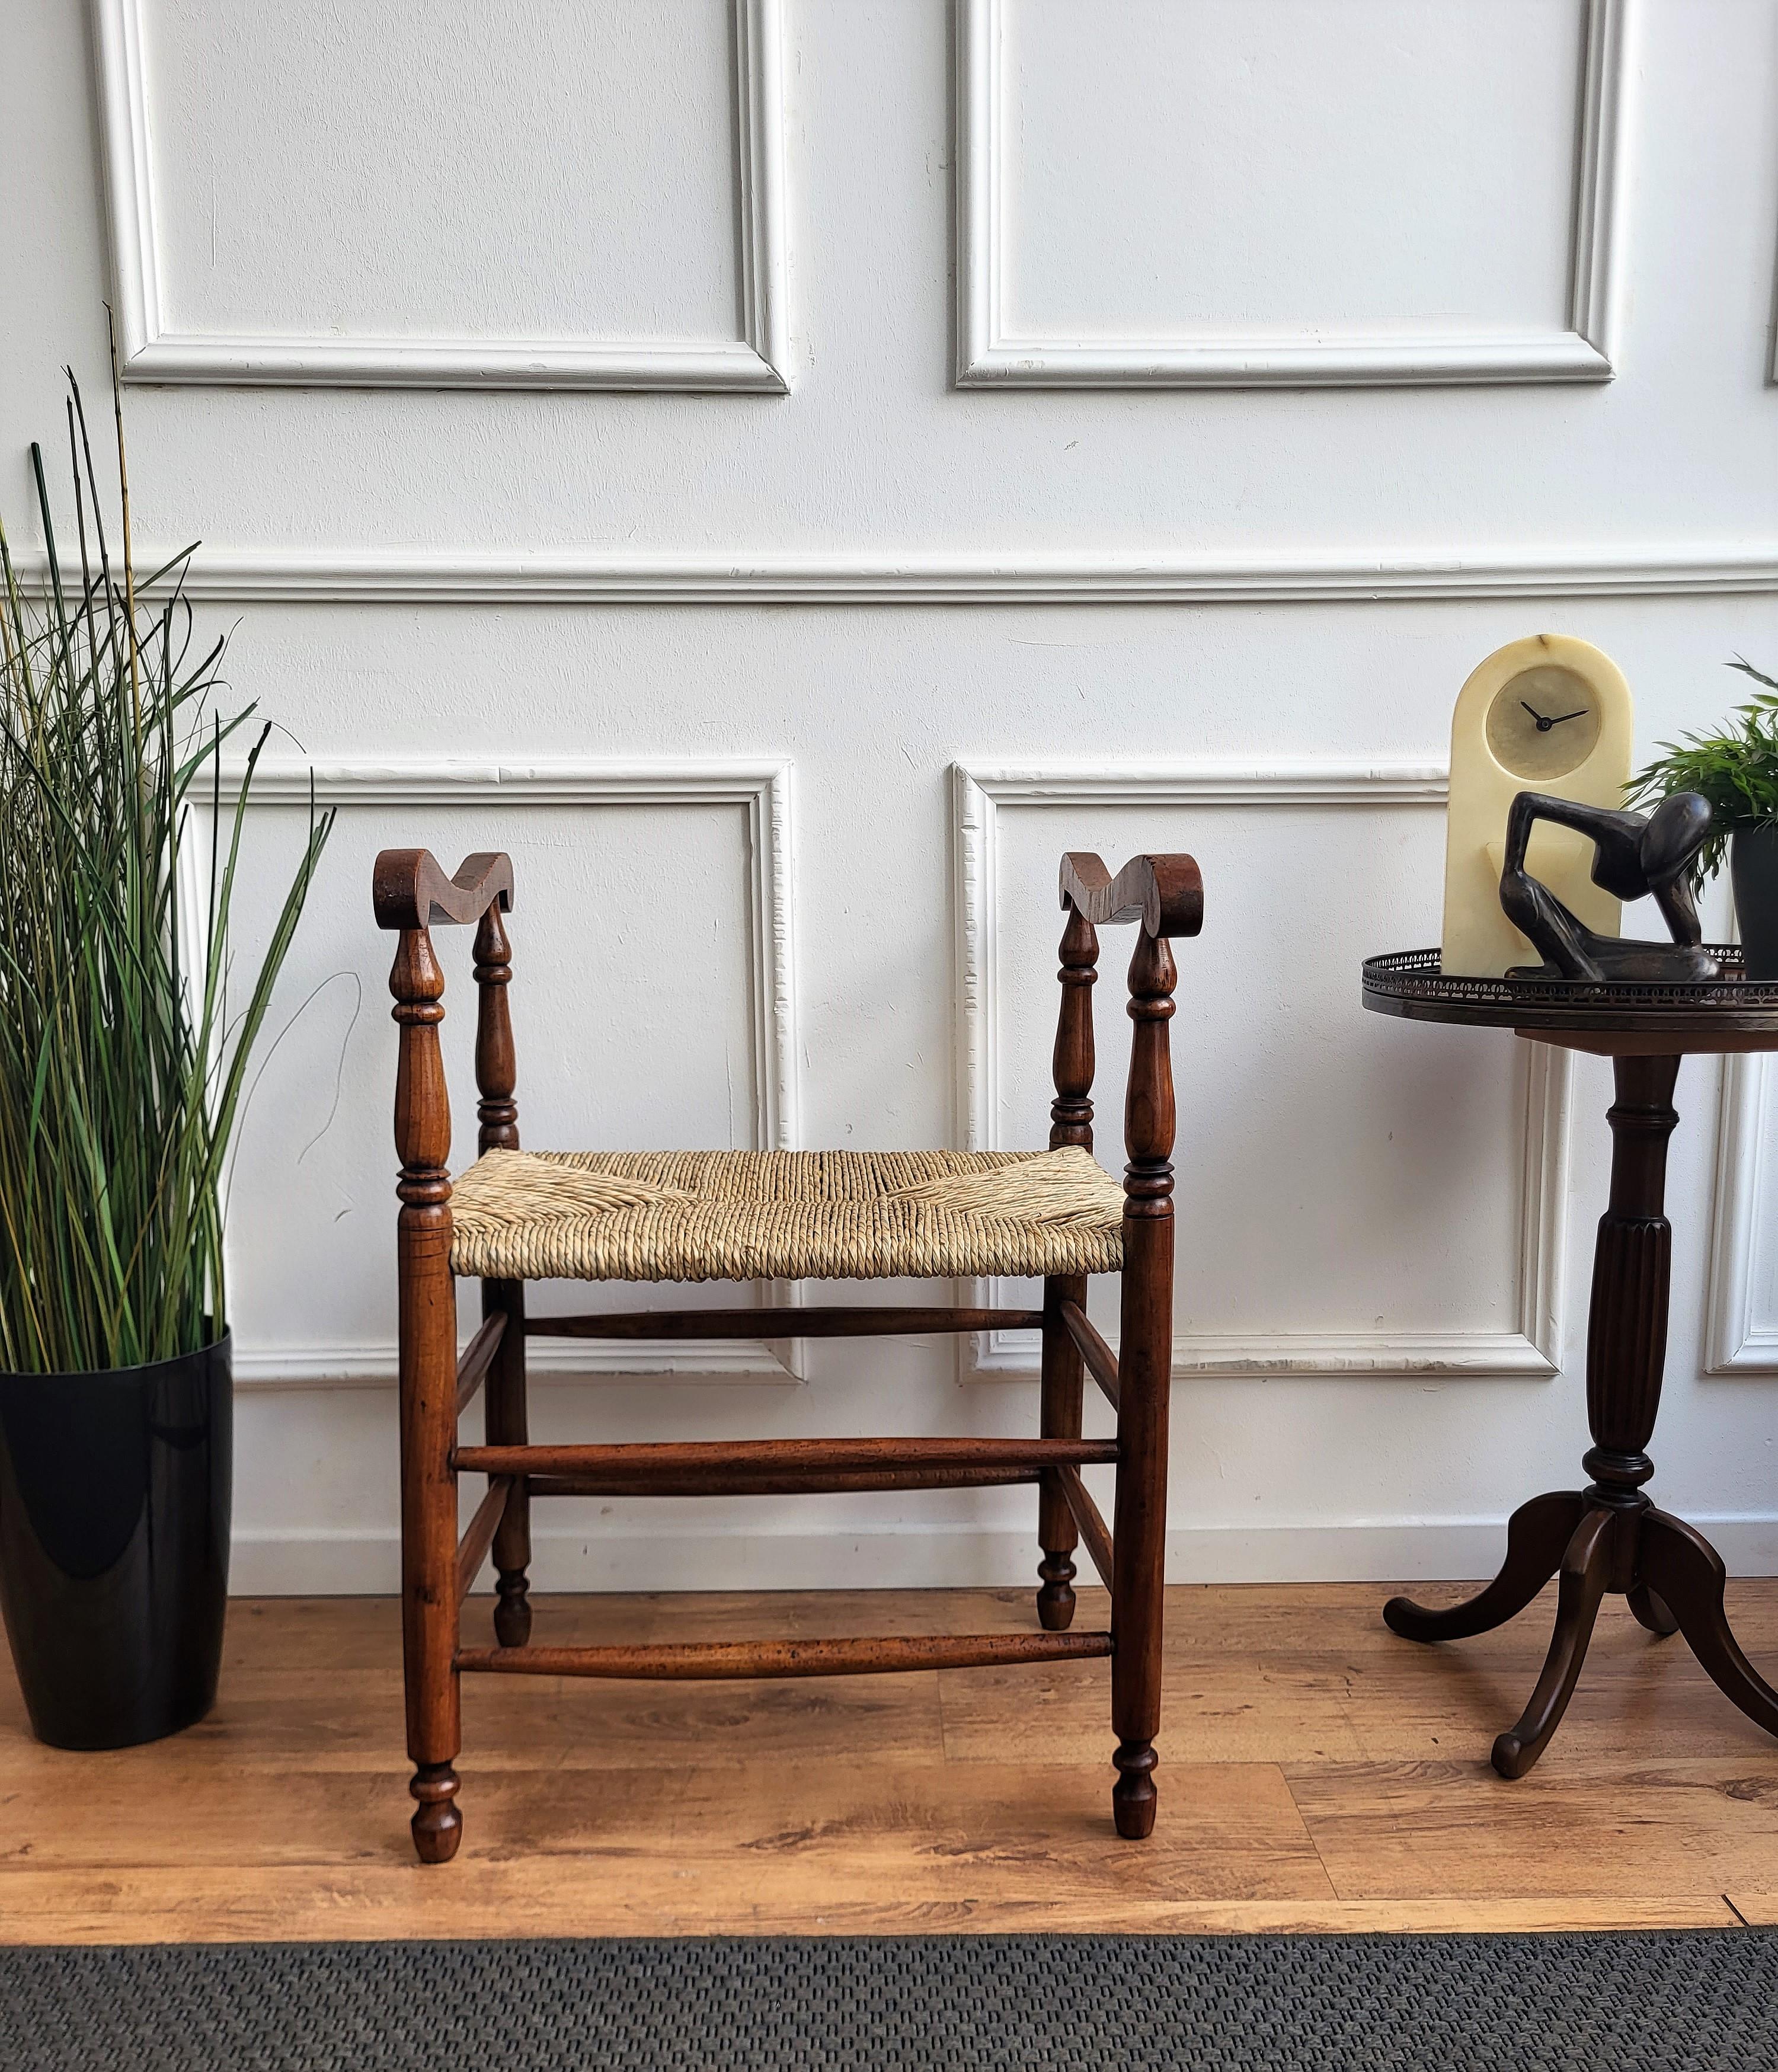 Stylish and beautiful 1960s Mid-Century Modern stool in wood and cord or woven rope, in the style of Audoux Minet with carved decorated wooden structure. The traditional and classical design and shape of the wooden structure, typical of Mid-Century